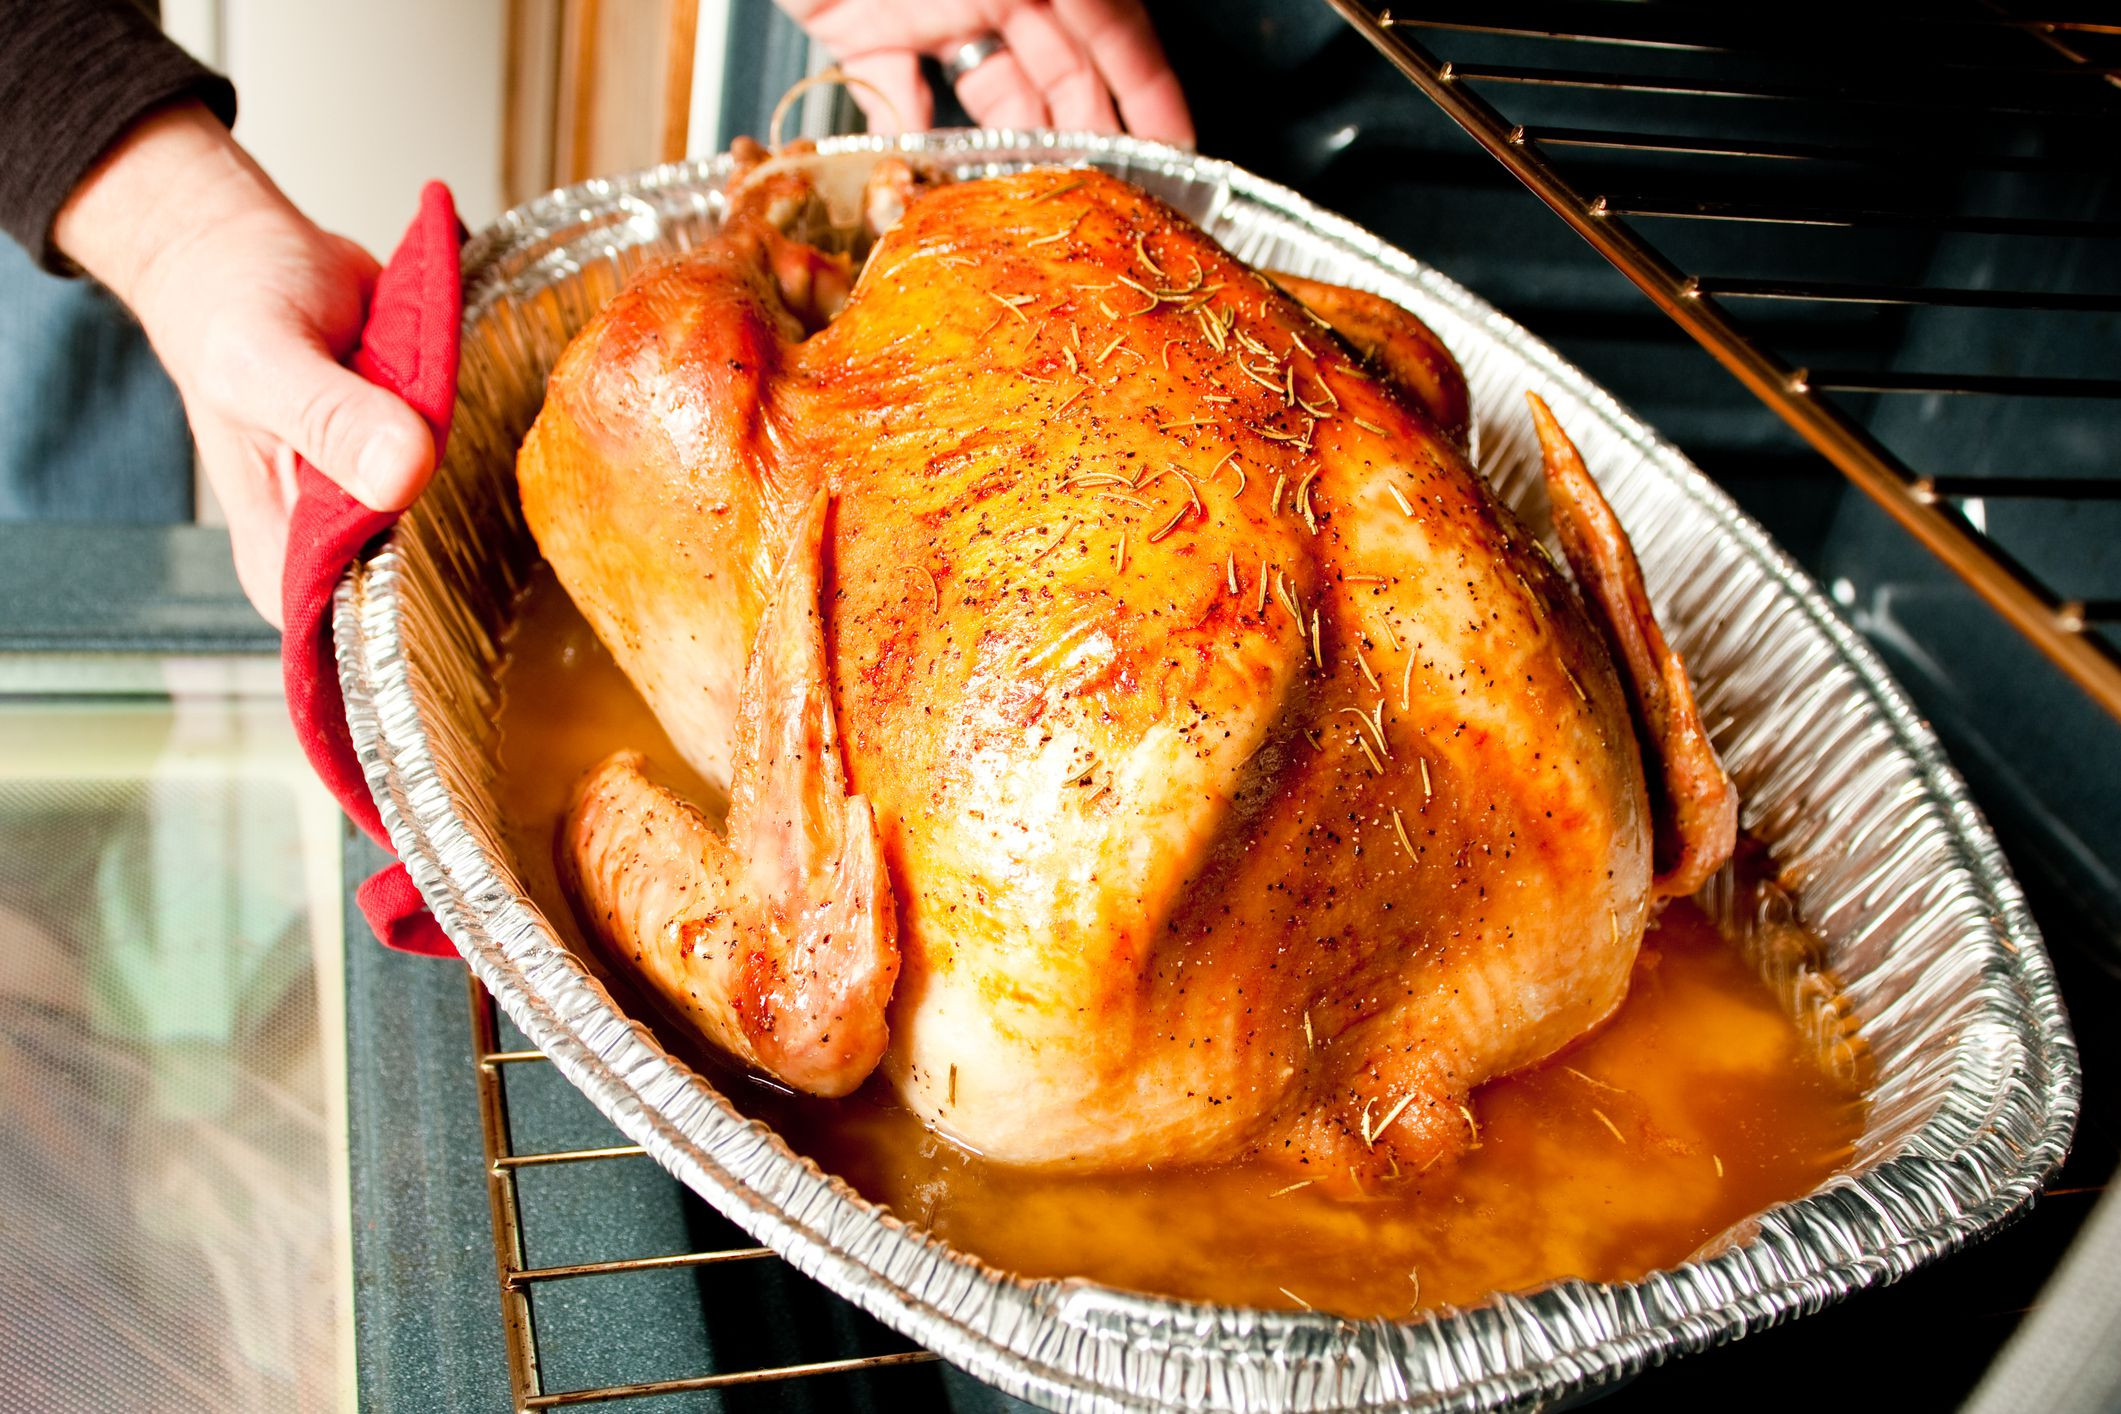 Buy A Cooked Turkey For Thanksgiving
 How to Cook a Frozen Turkey Without Thawing